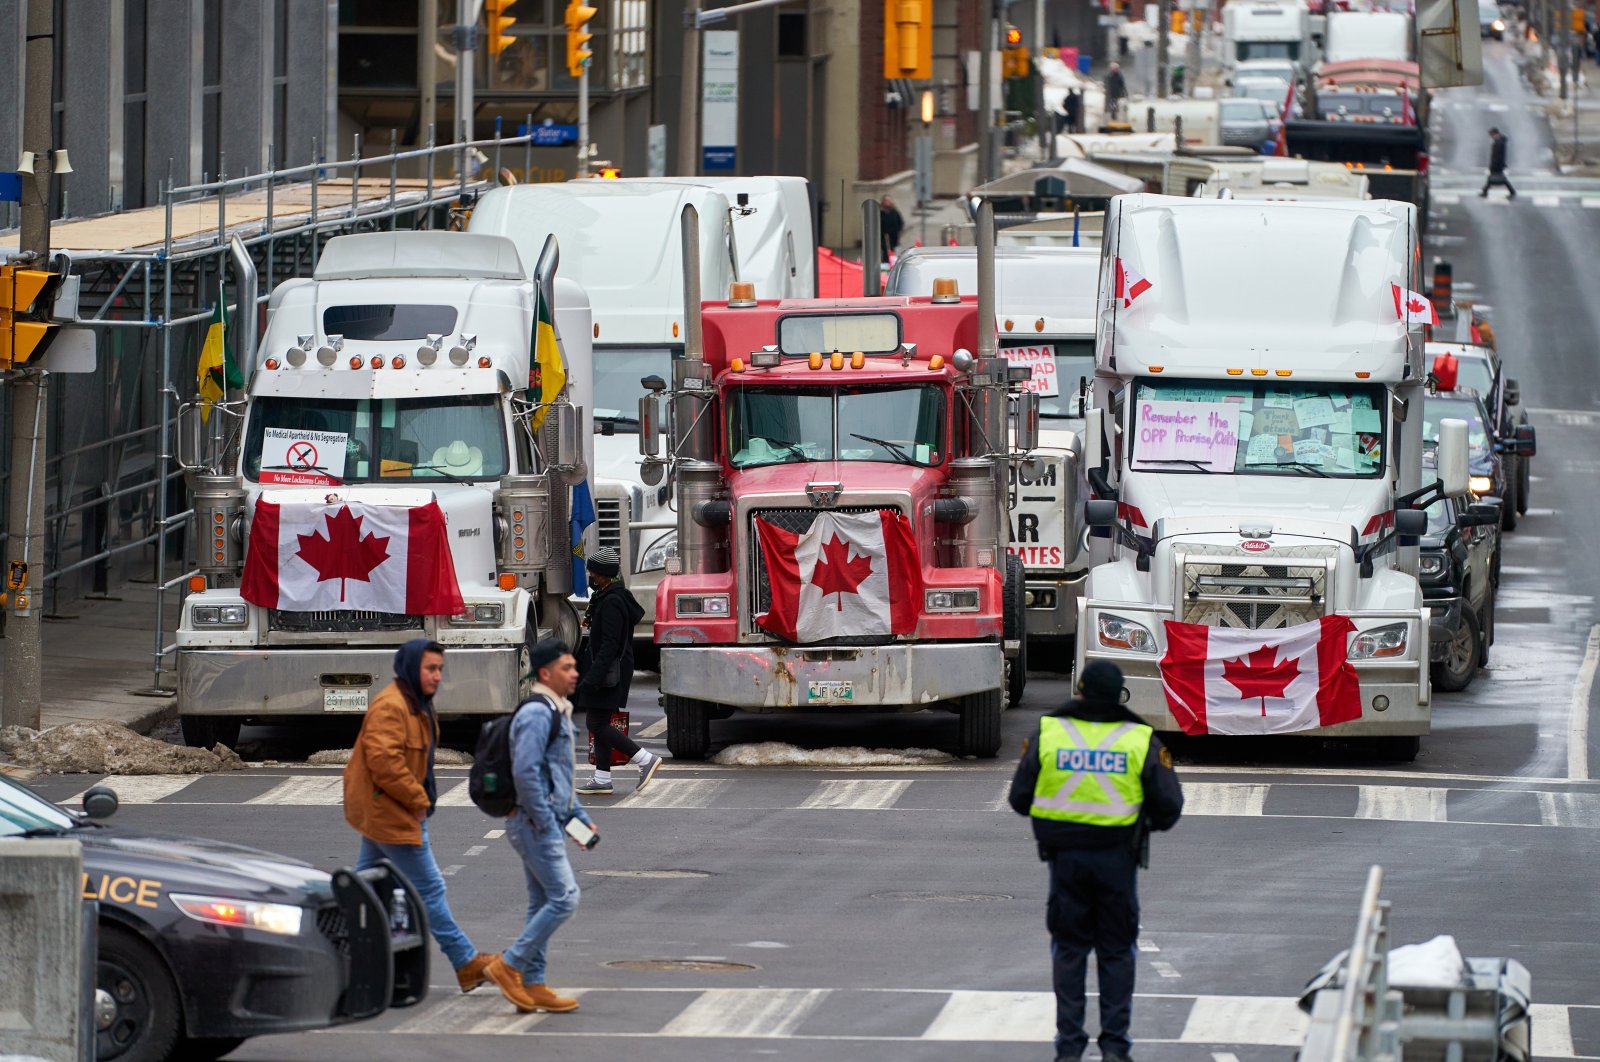 Ottawa citizens go to work as truckers block the streets near Parliament Hill during a protest against vaccine mandates in downtown Ottawa, Ontario, Canada, Feb. 2022. (EPA Photo)